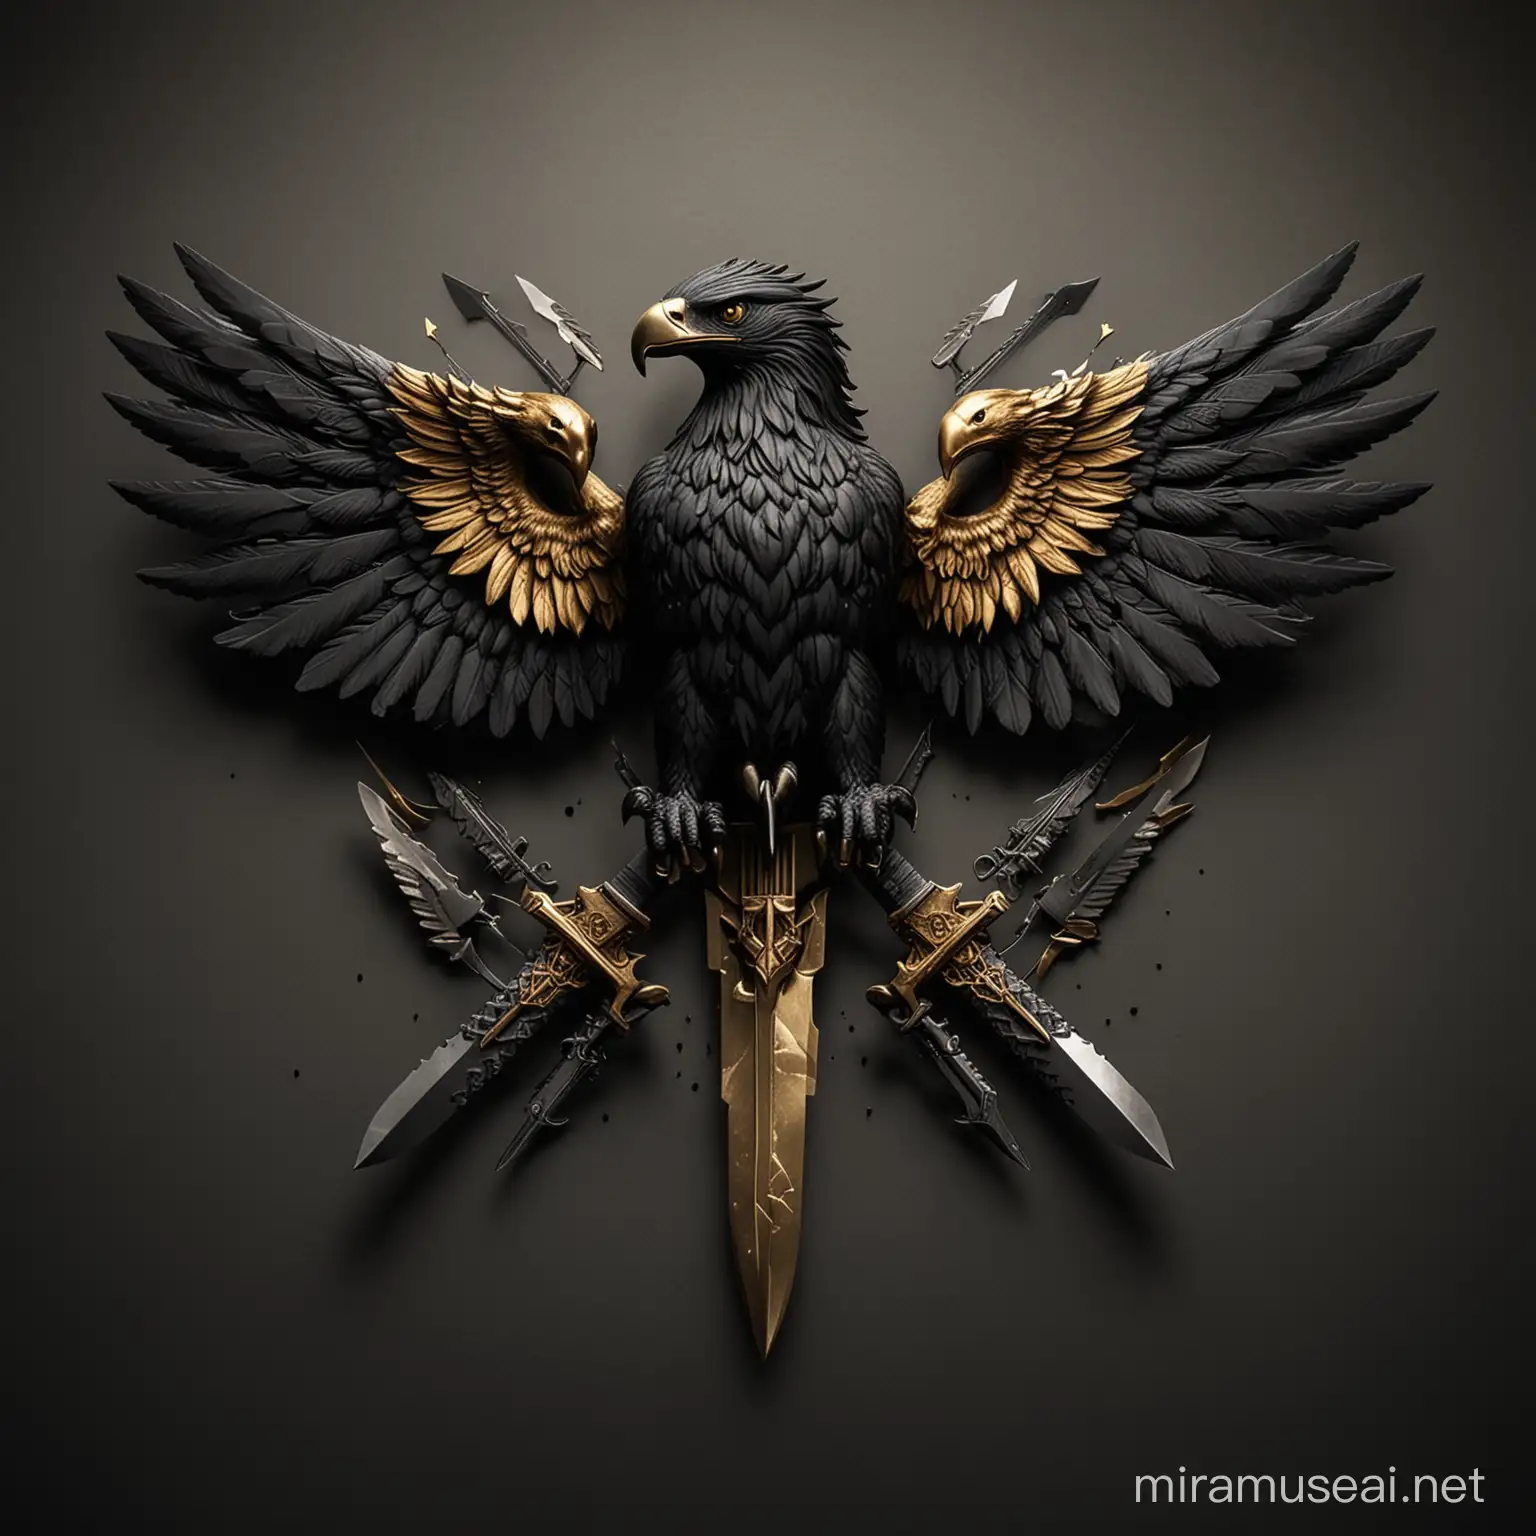 A special forces insignia. A black hawk with the wings wide open, holding a lighting in the claws. 2 knives crossed in the background. All dark and gold colours. 